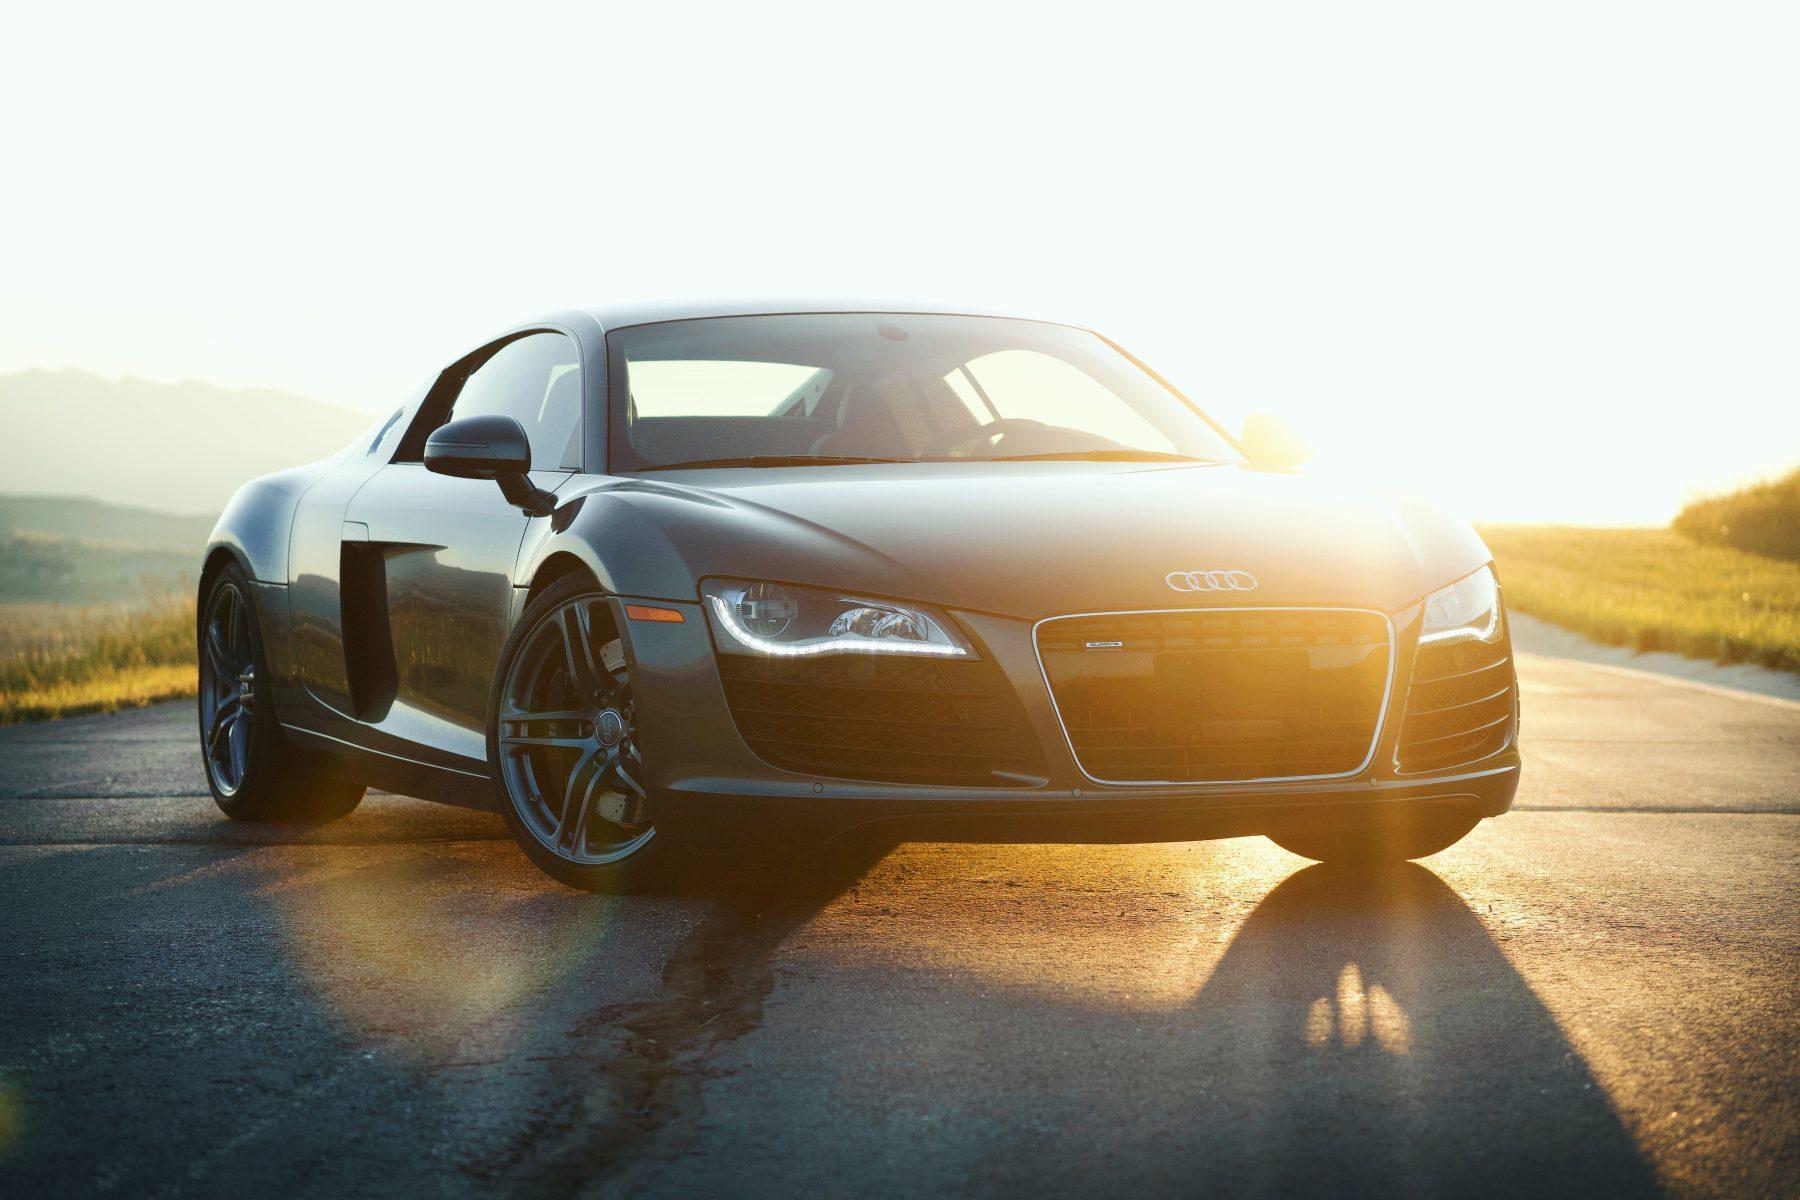 car rental in montreal, rent a corporate car in Montreal, luxury car rental in Montreal, renting audi in montreal